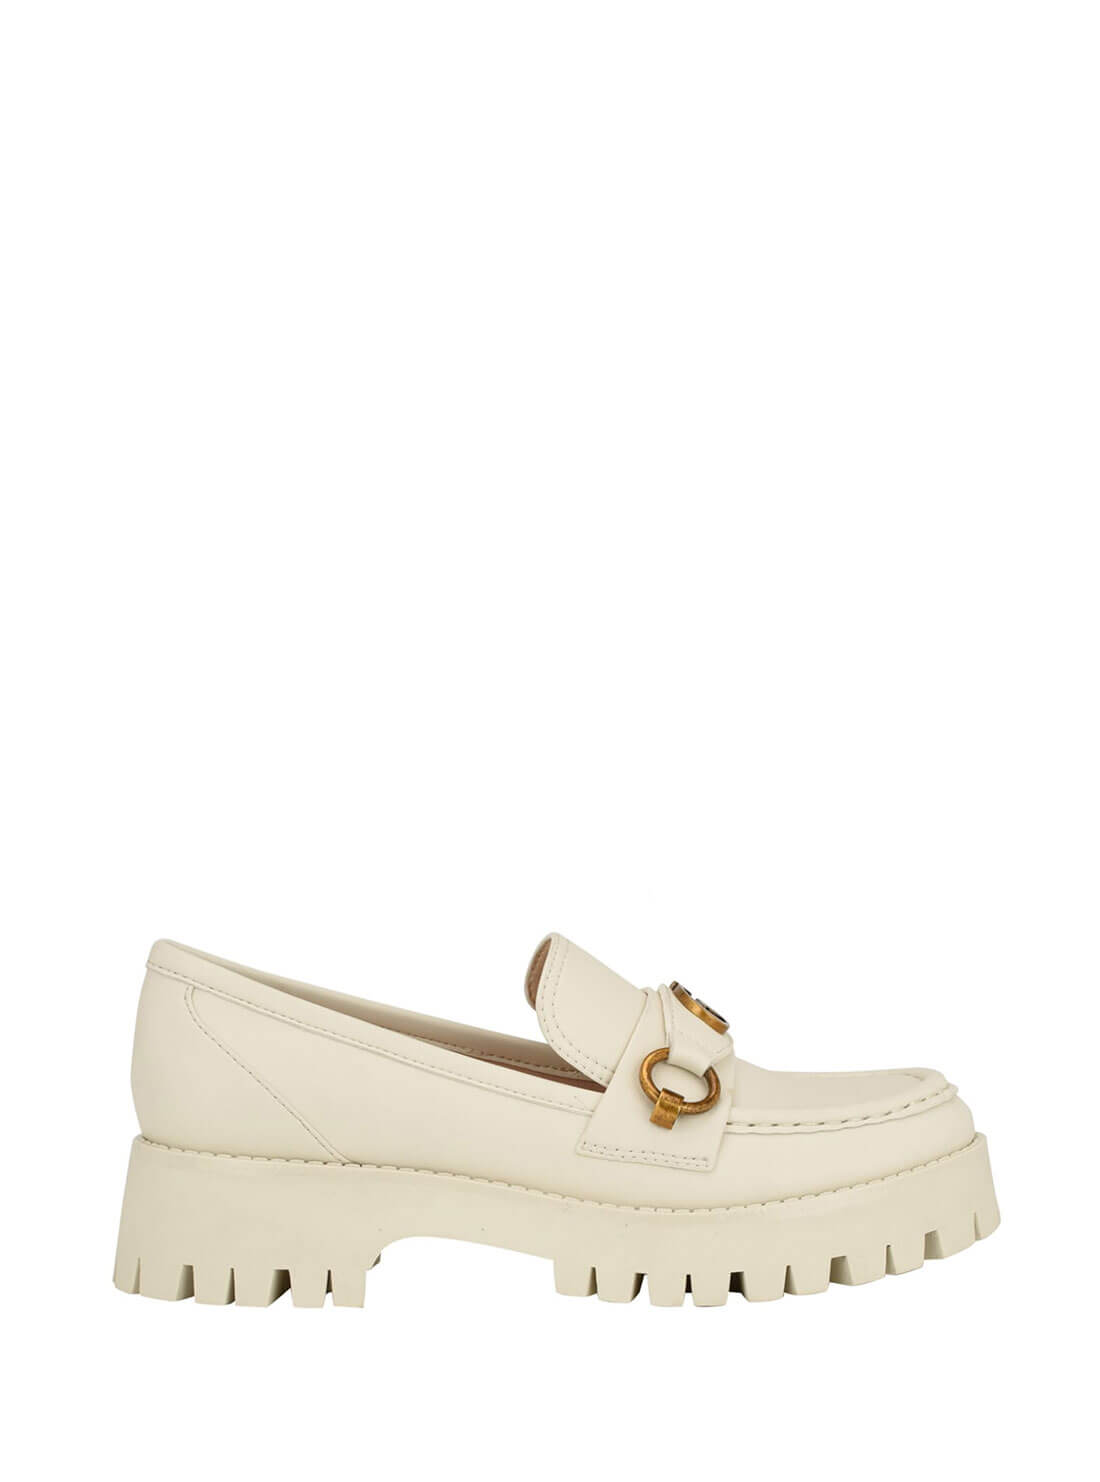 White Almost Loafers | GUESS Women's Shoes | side view